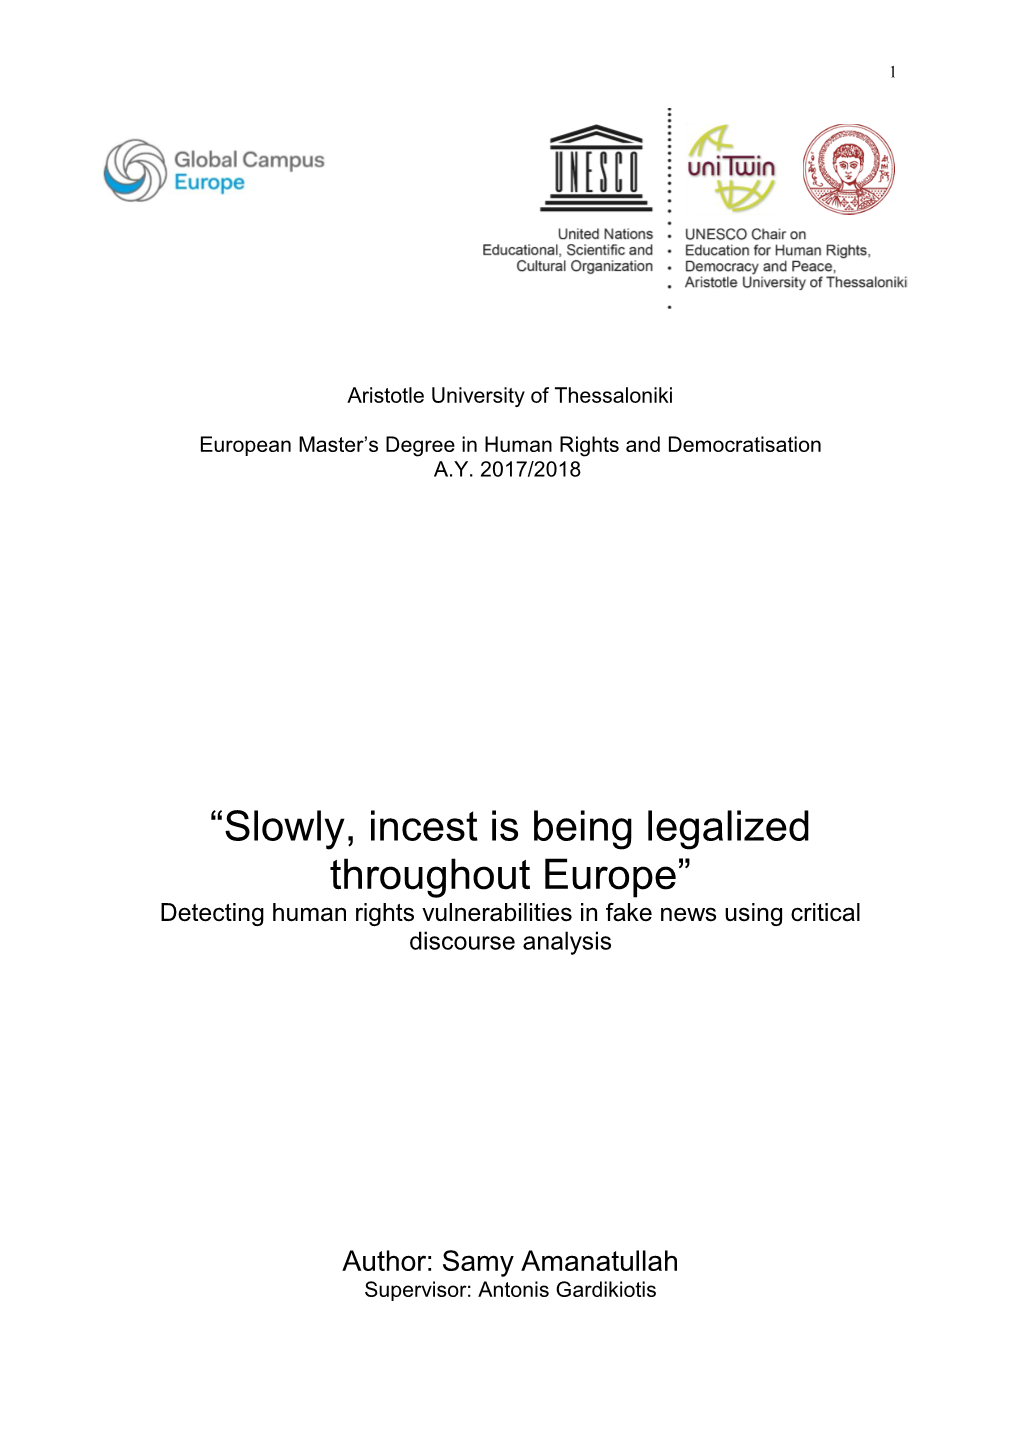 “Slowly, Incest Is Being Legalized Throughout Europe” Detecting Human Rights Vulnerabilities in Fake News Using Critical Discourse Analysis